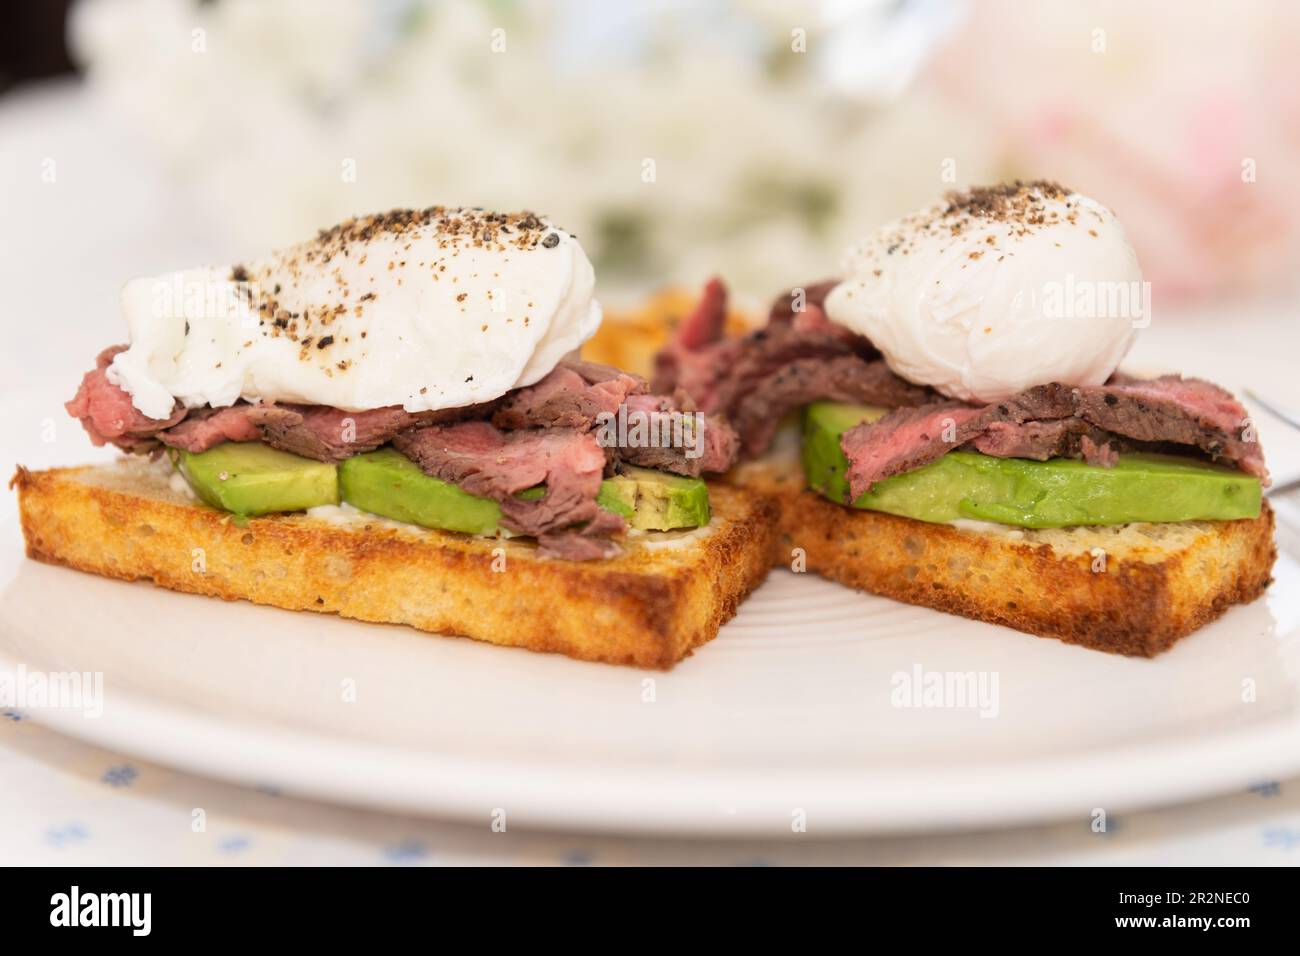 Steak benedict breakfast. Poached eggs, grilled steak and avocado on toast, with side of hash browned potatoes. Stock Photo